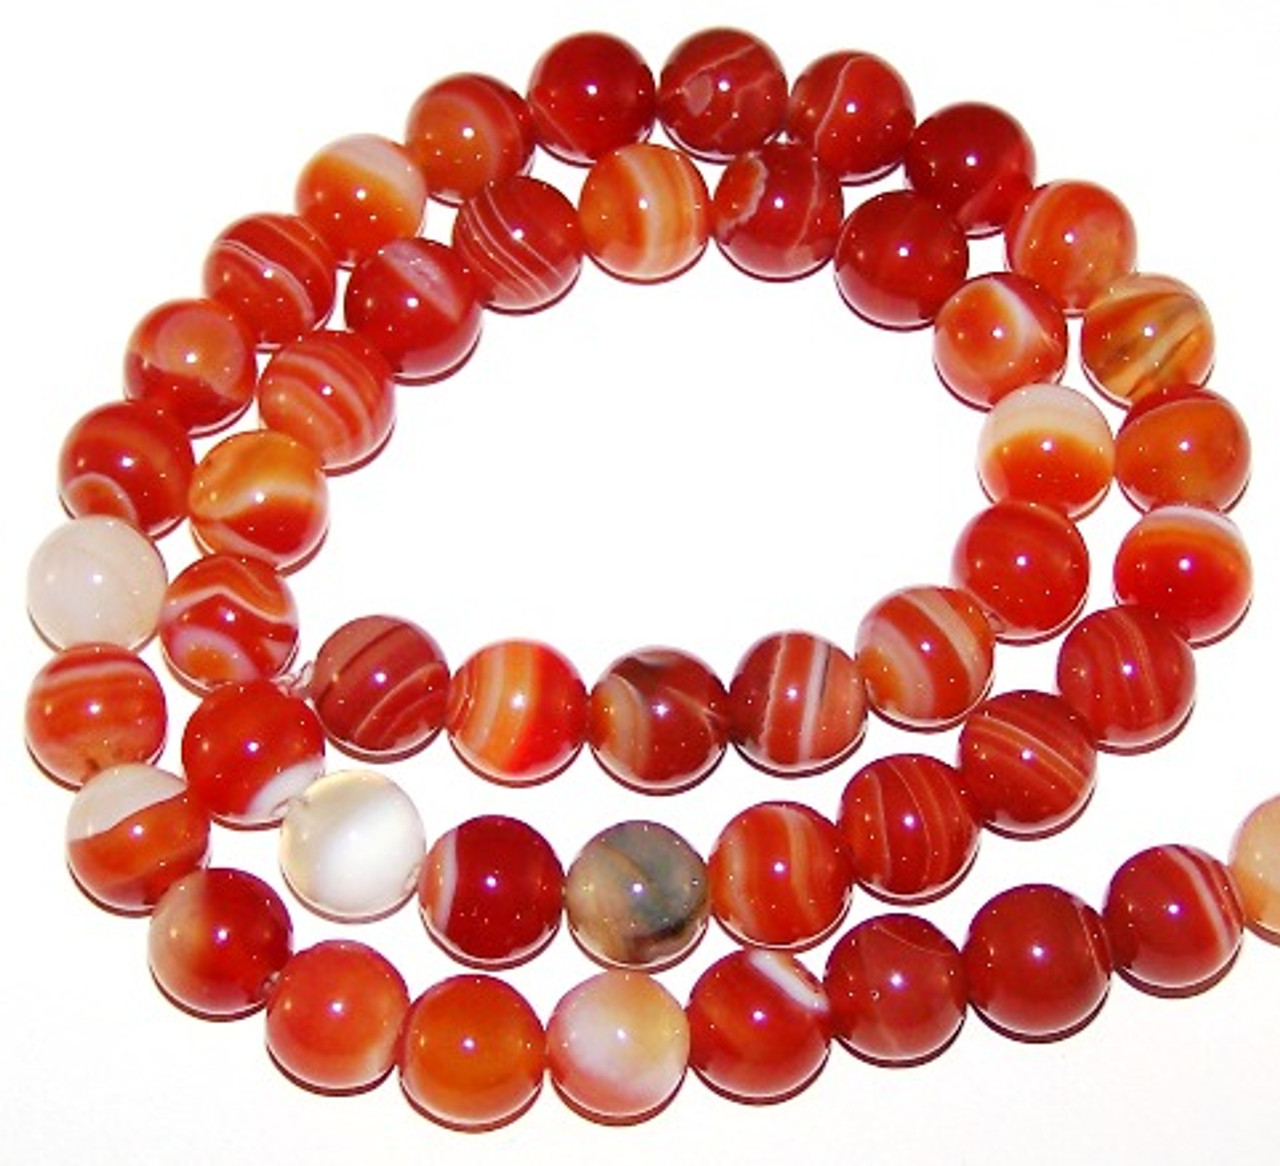 8mm Natural Red Agate Beads Round